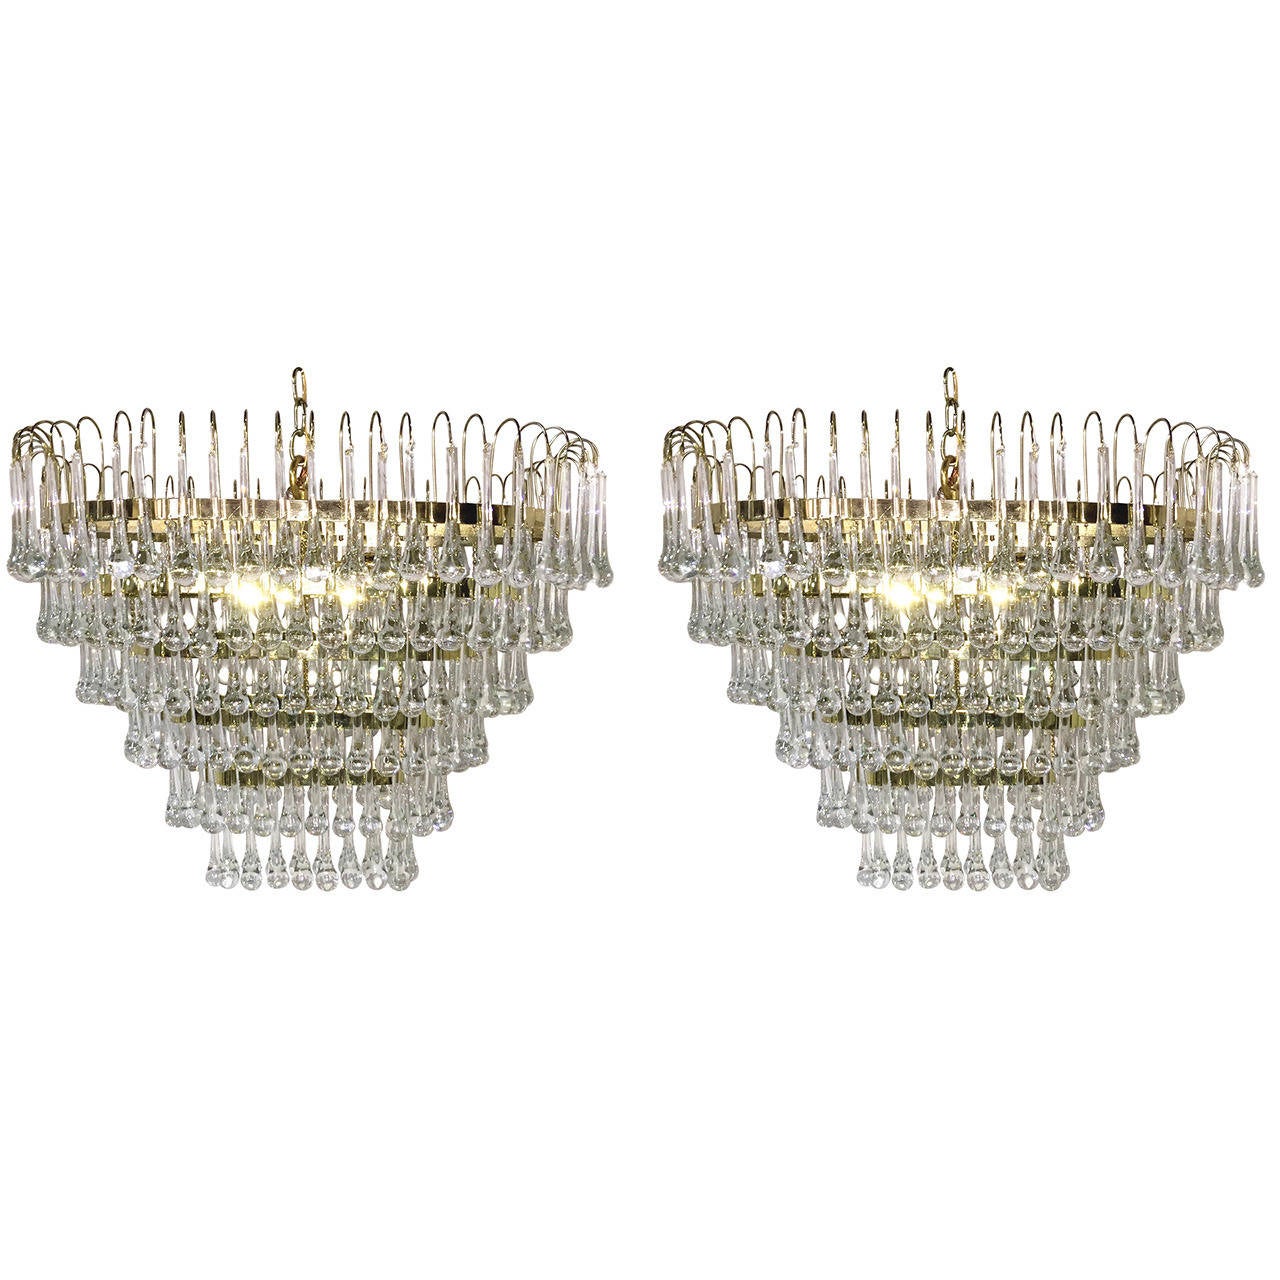 Pair of Oval Light Fixtures